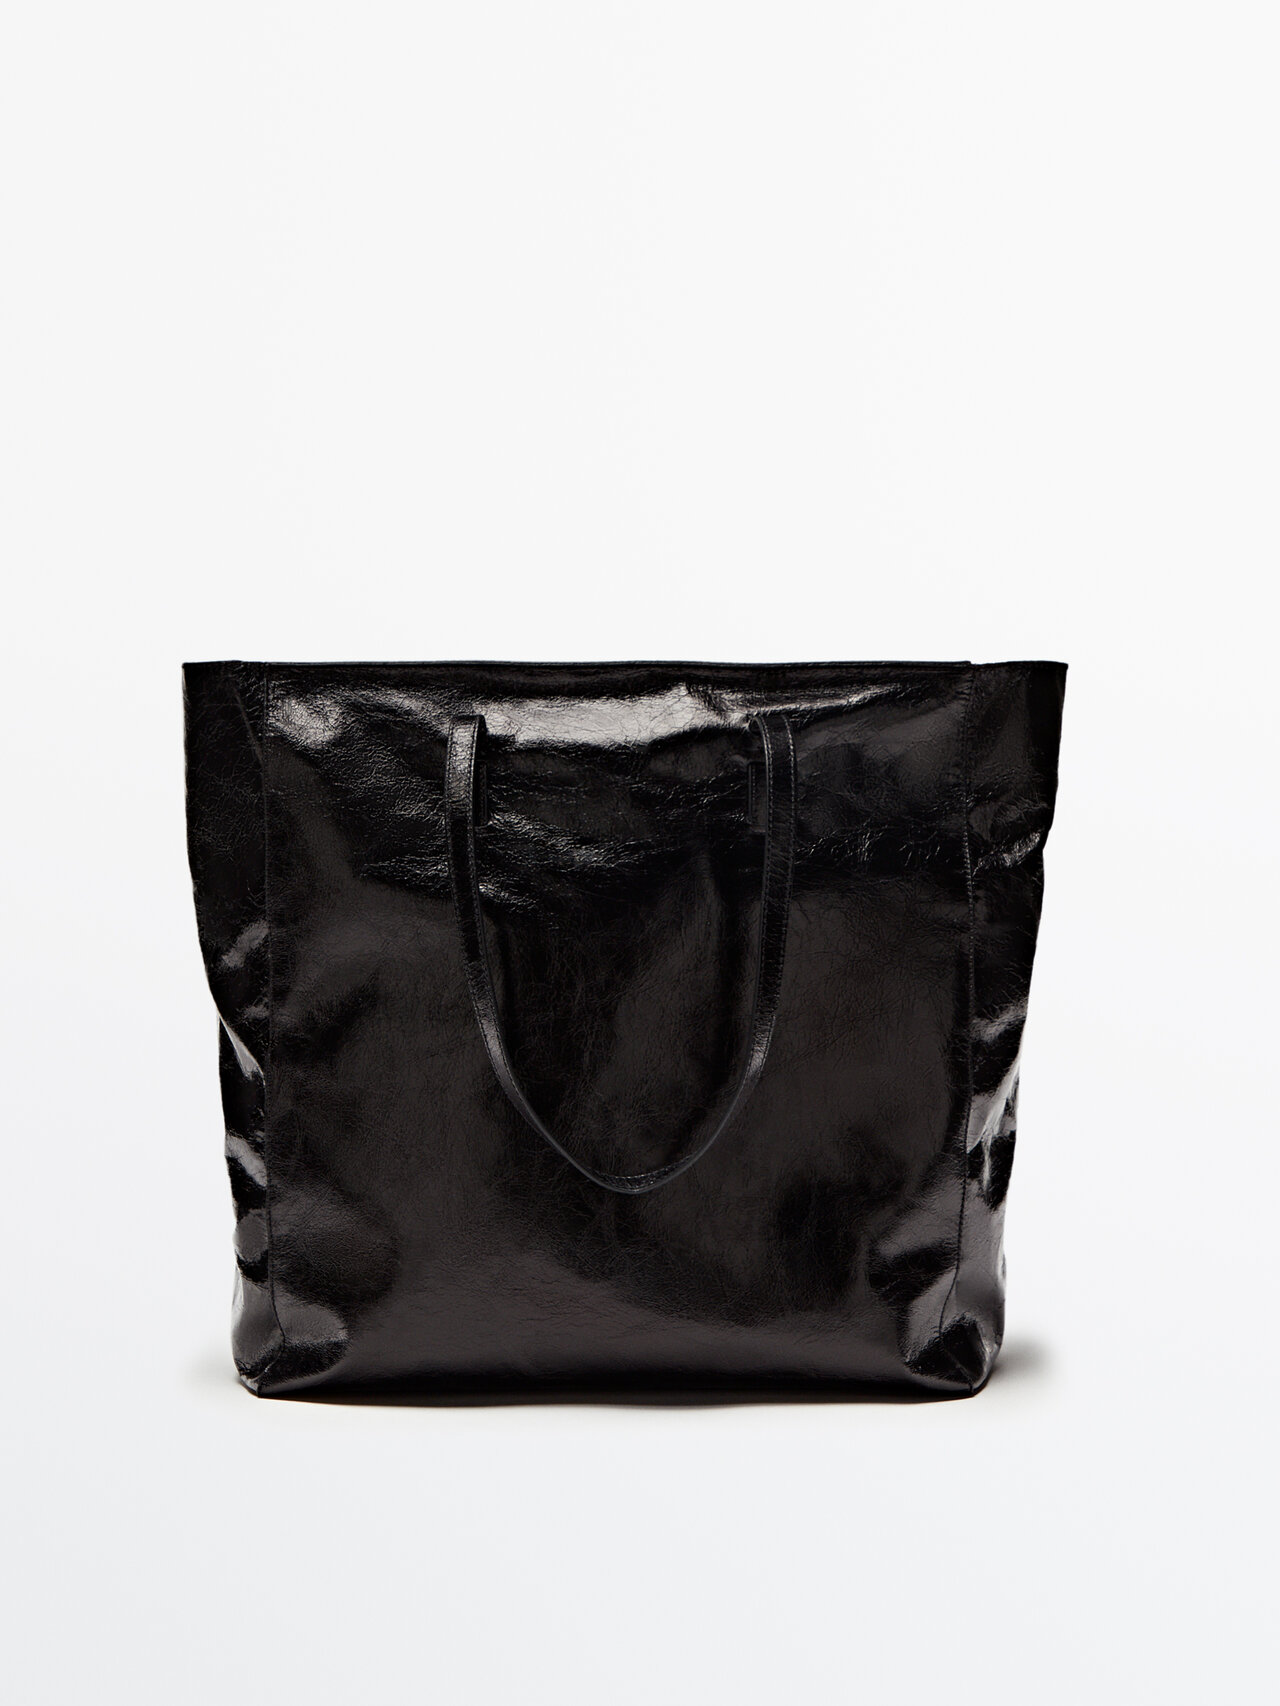 Massimo Dutti Leather Tote Bag With A Cracked Finish In Black